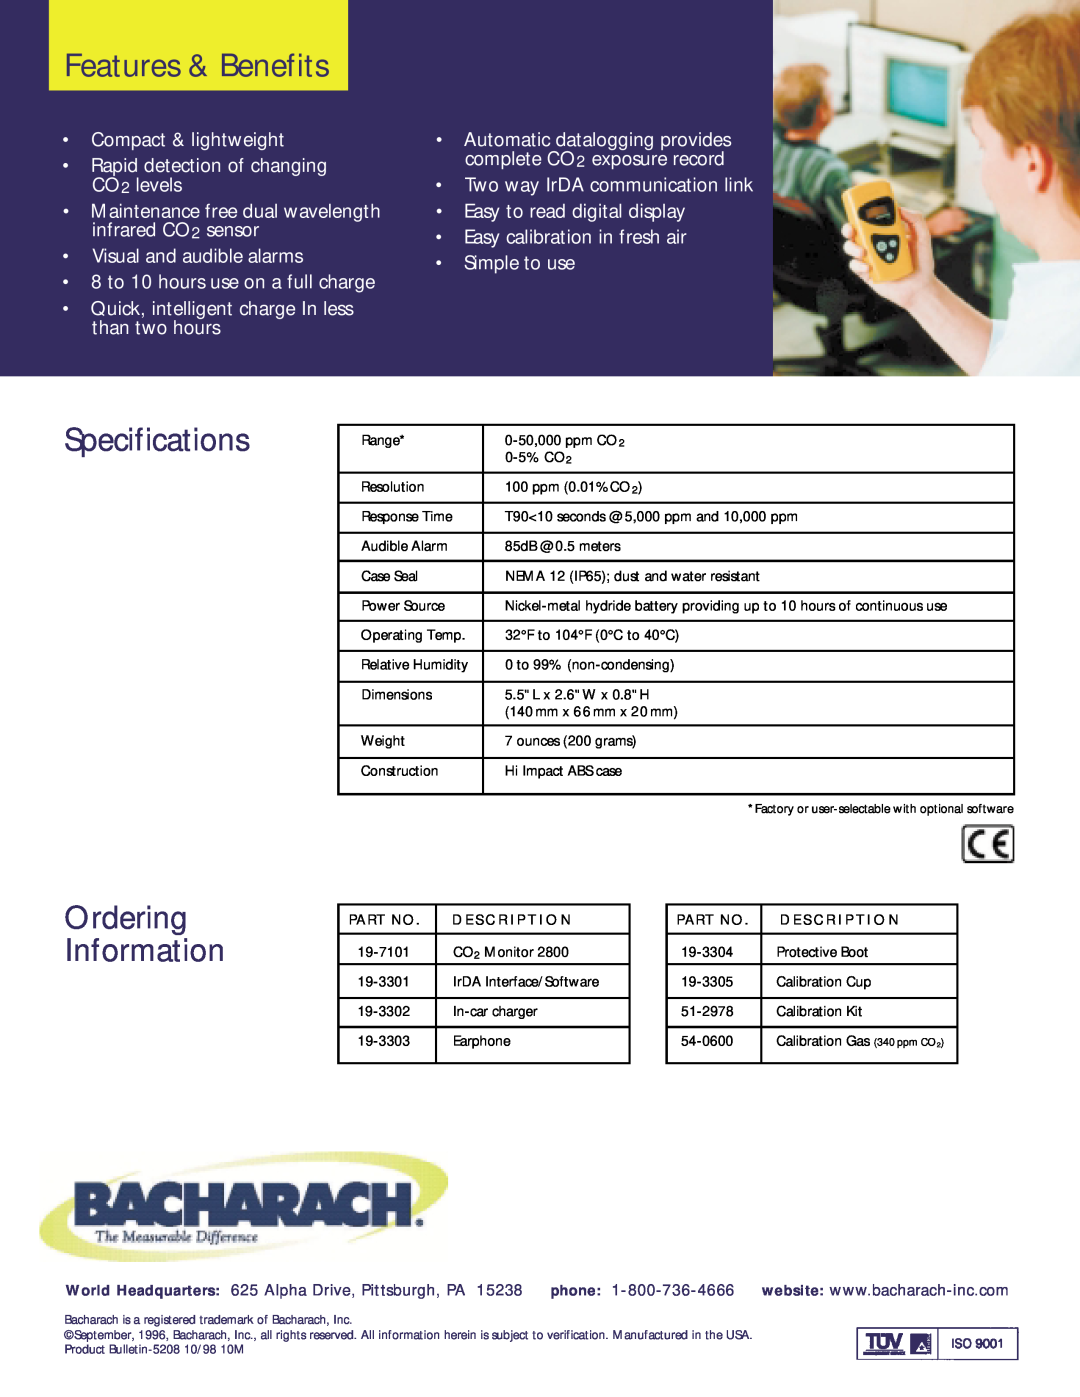 Bacharach 2800 manual Features & Benefits, Specifications, Ordering Information 